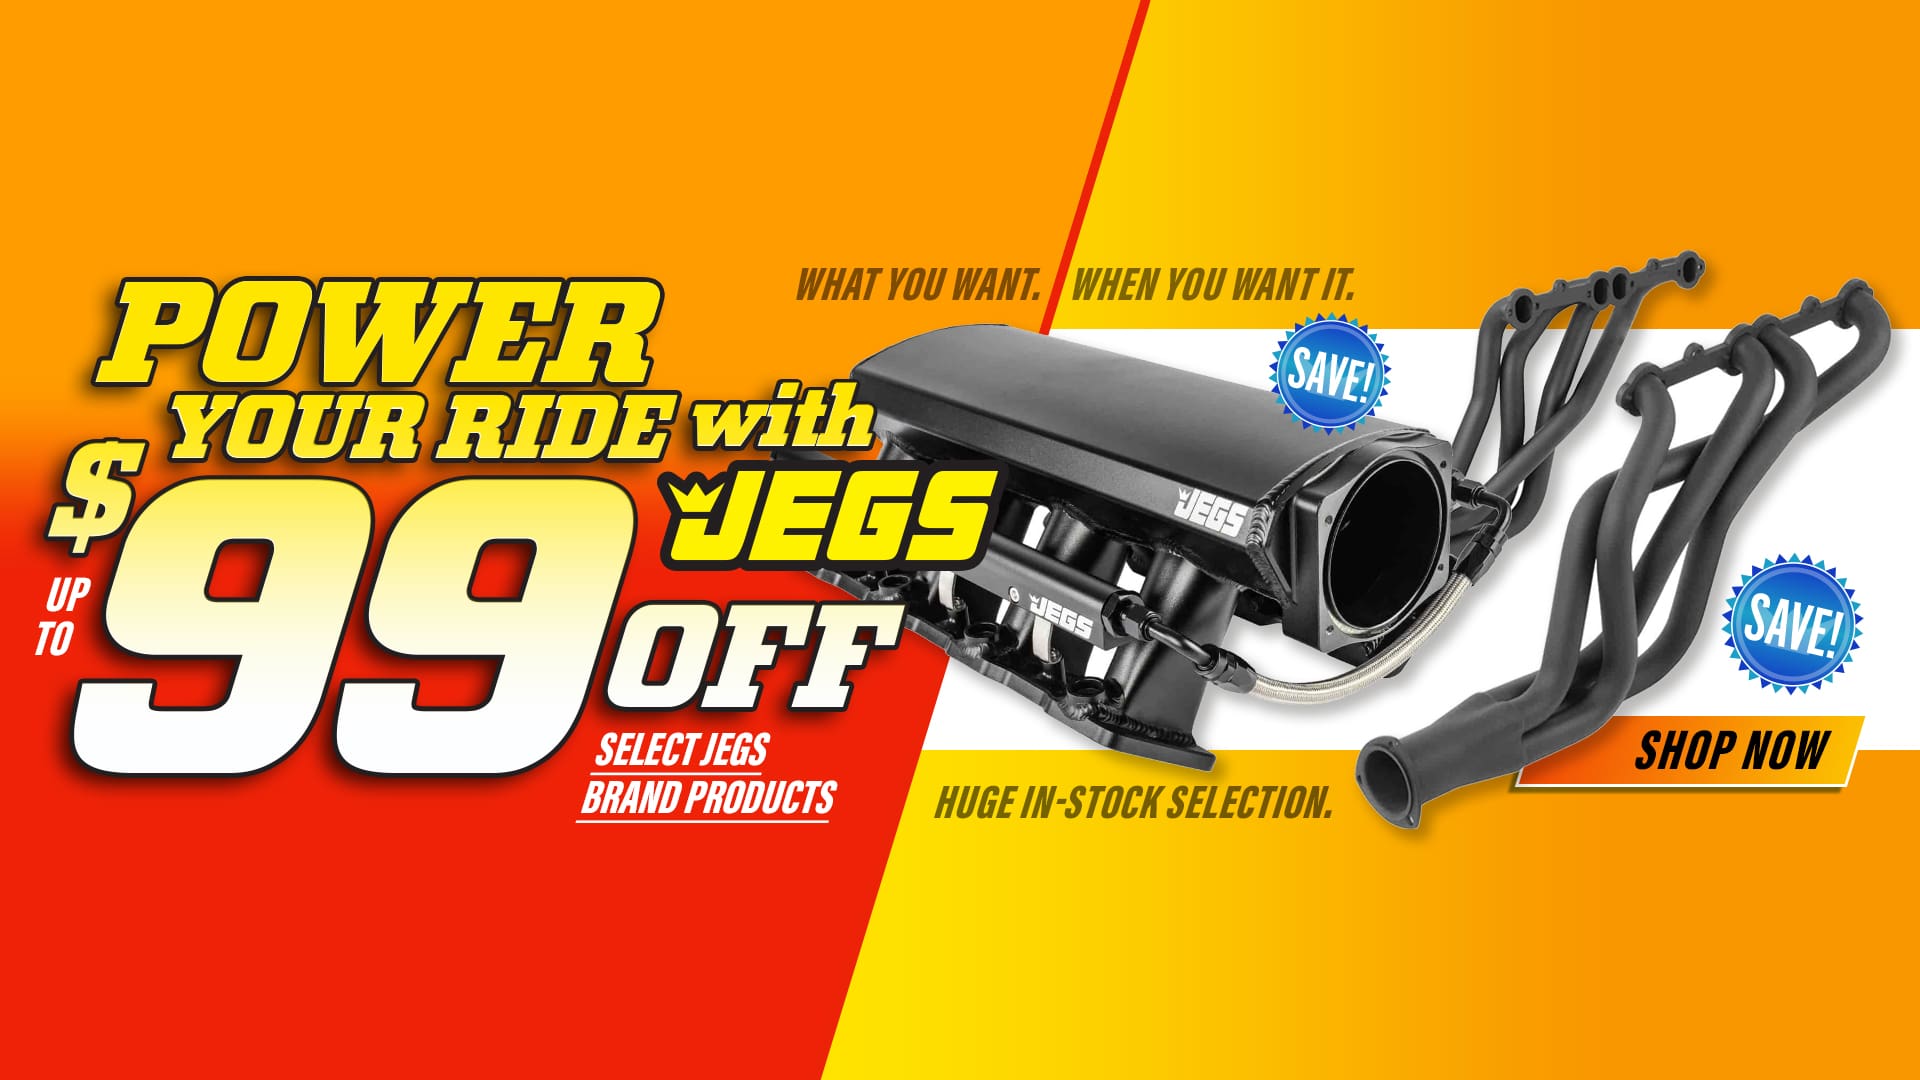 JEGS Power Your Ride with JEGS Up to $99 Off Select JEGS Brand Products